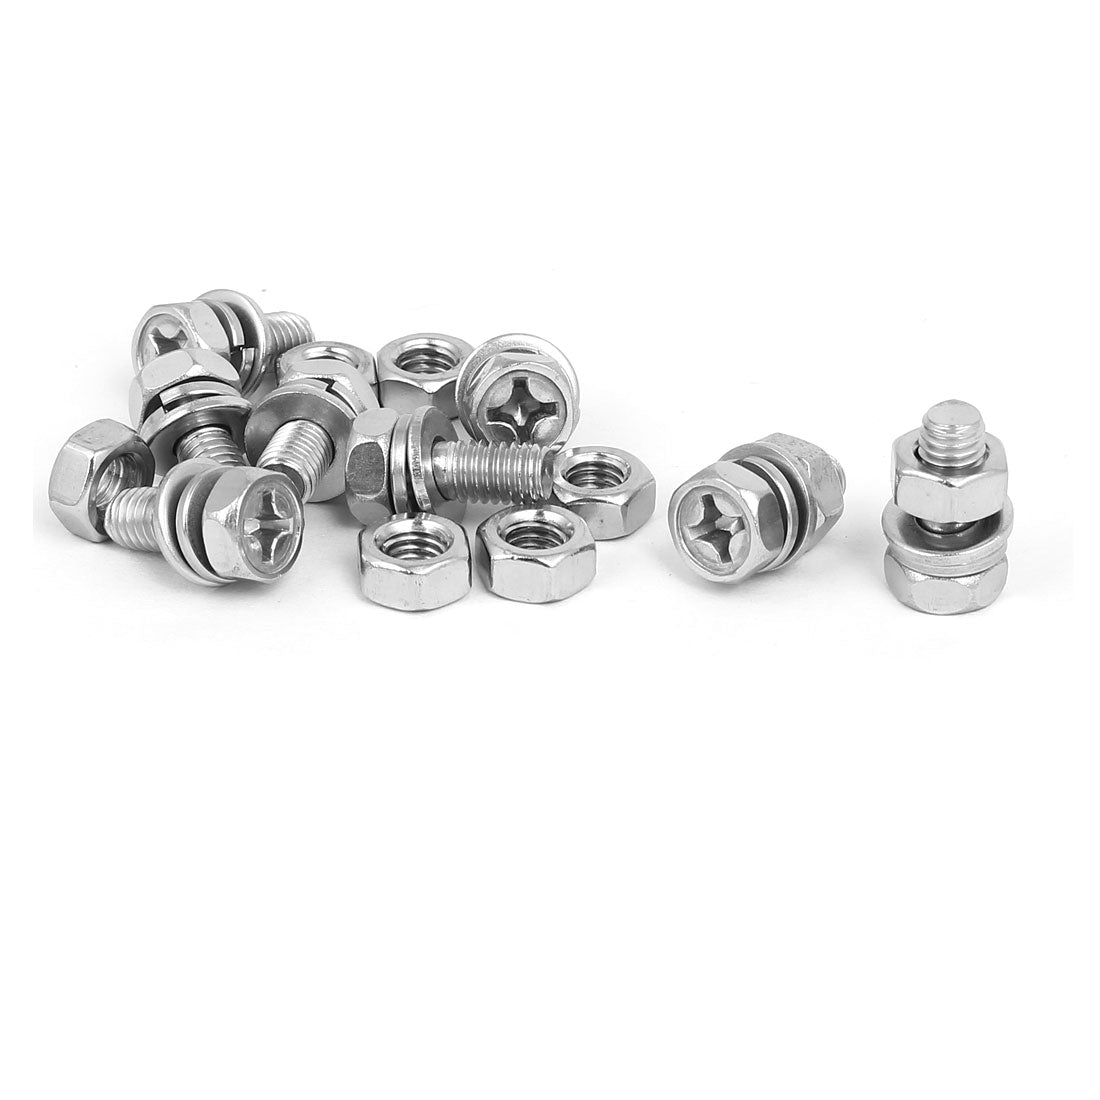 uxcell Uxcell M6 x 14mm 304 Stainless Steel Phillips Hex Head Bolts Nuts w Washers 8 Sets